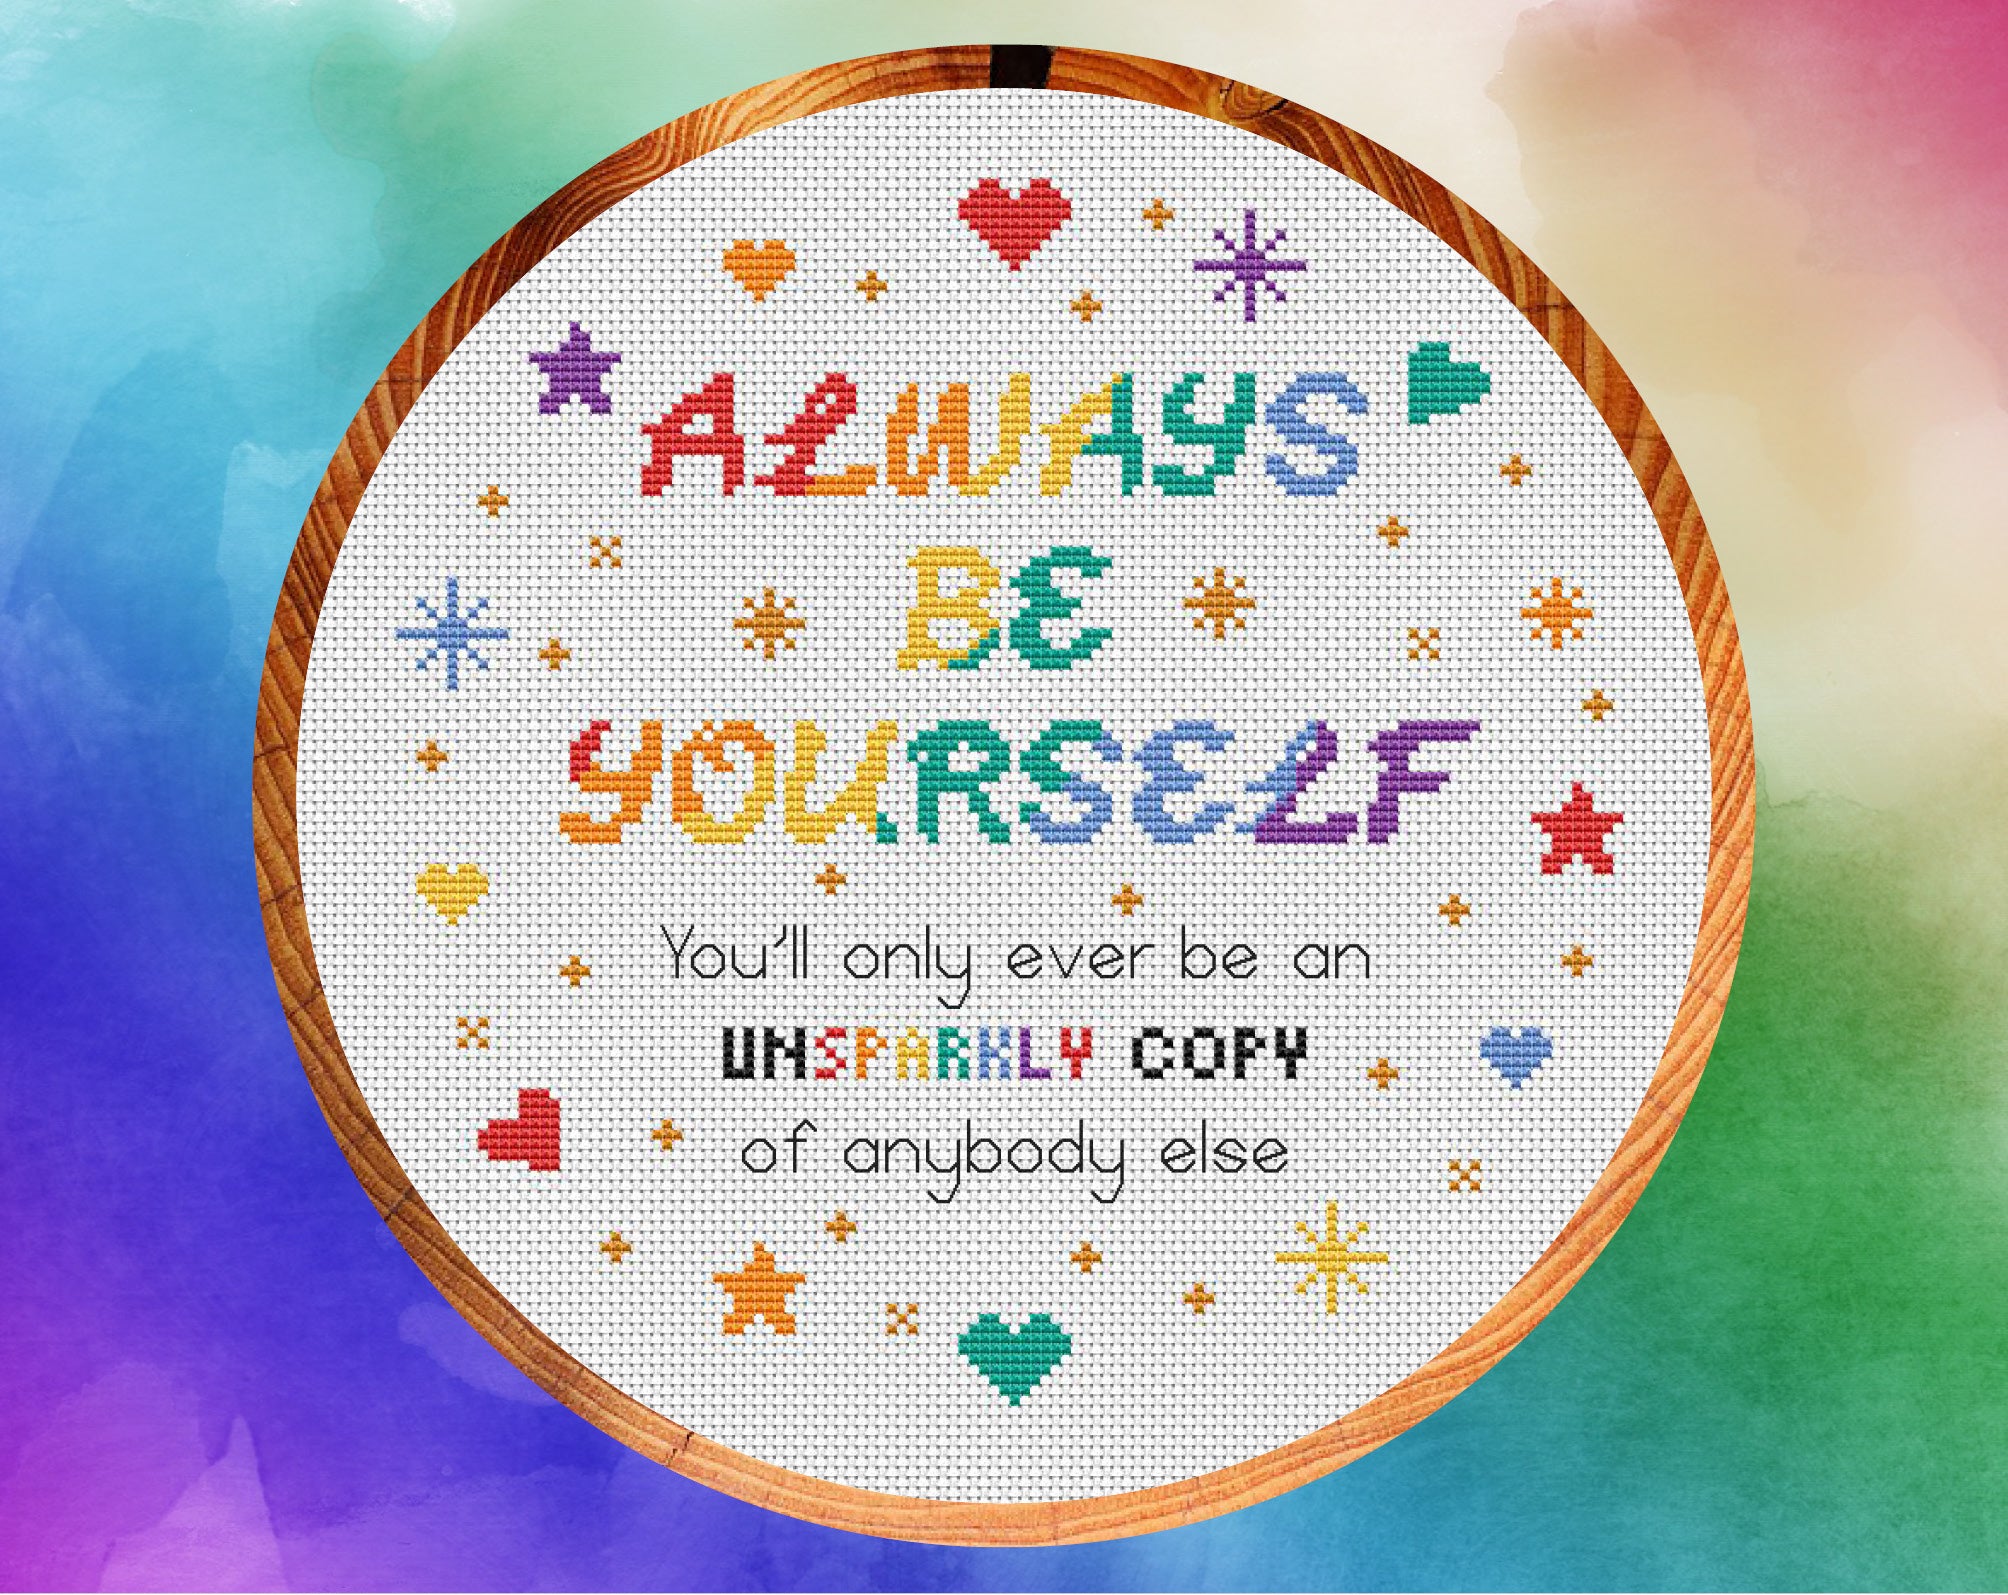 Inspirational cross stitch pattern with the words "Always be yourself - you'll only ever be an unsparkly copy of anybody else". Shown in hoop.